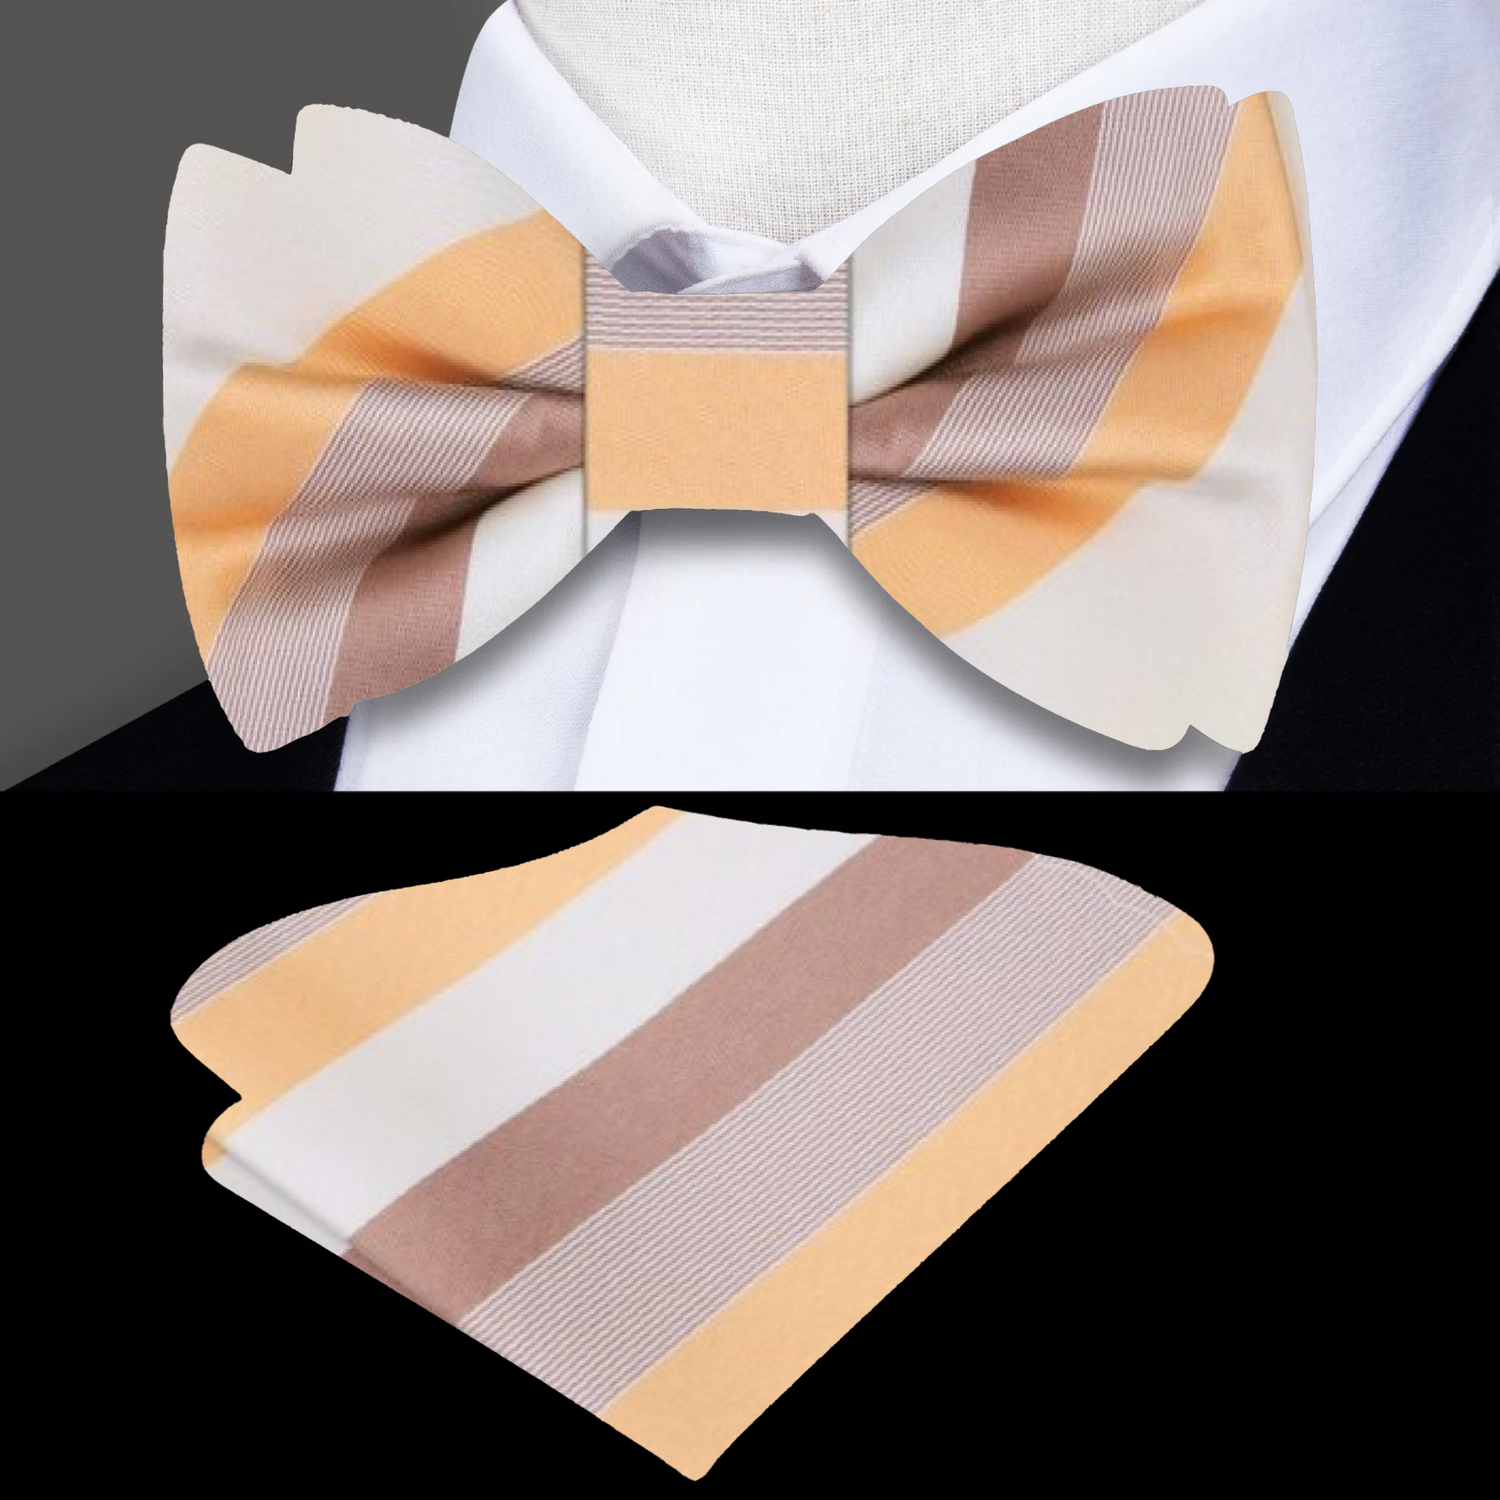 Shades of Brown Stripe Bow Tie and Pocket Square ||Shades of Brown